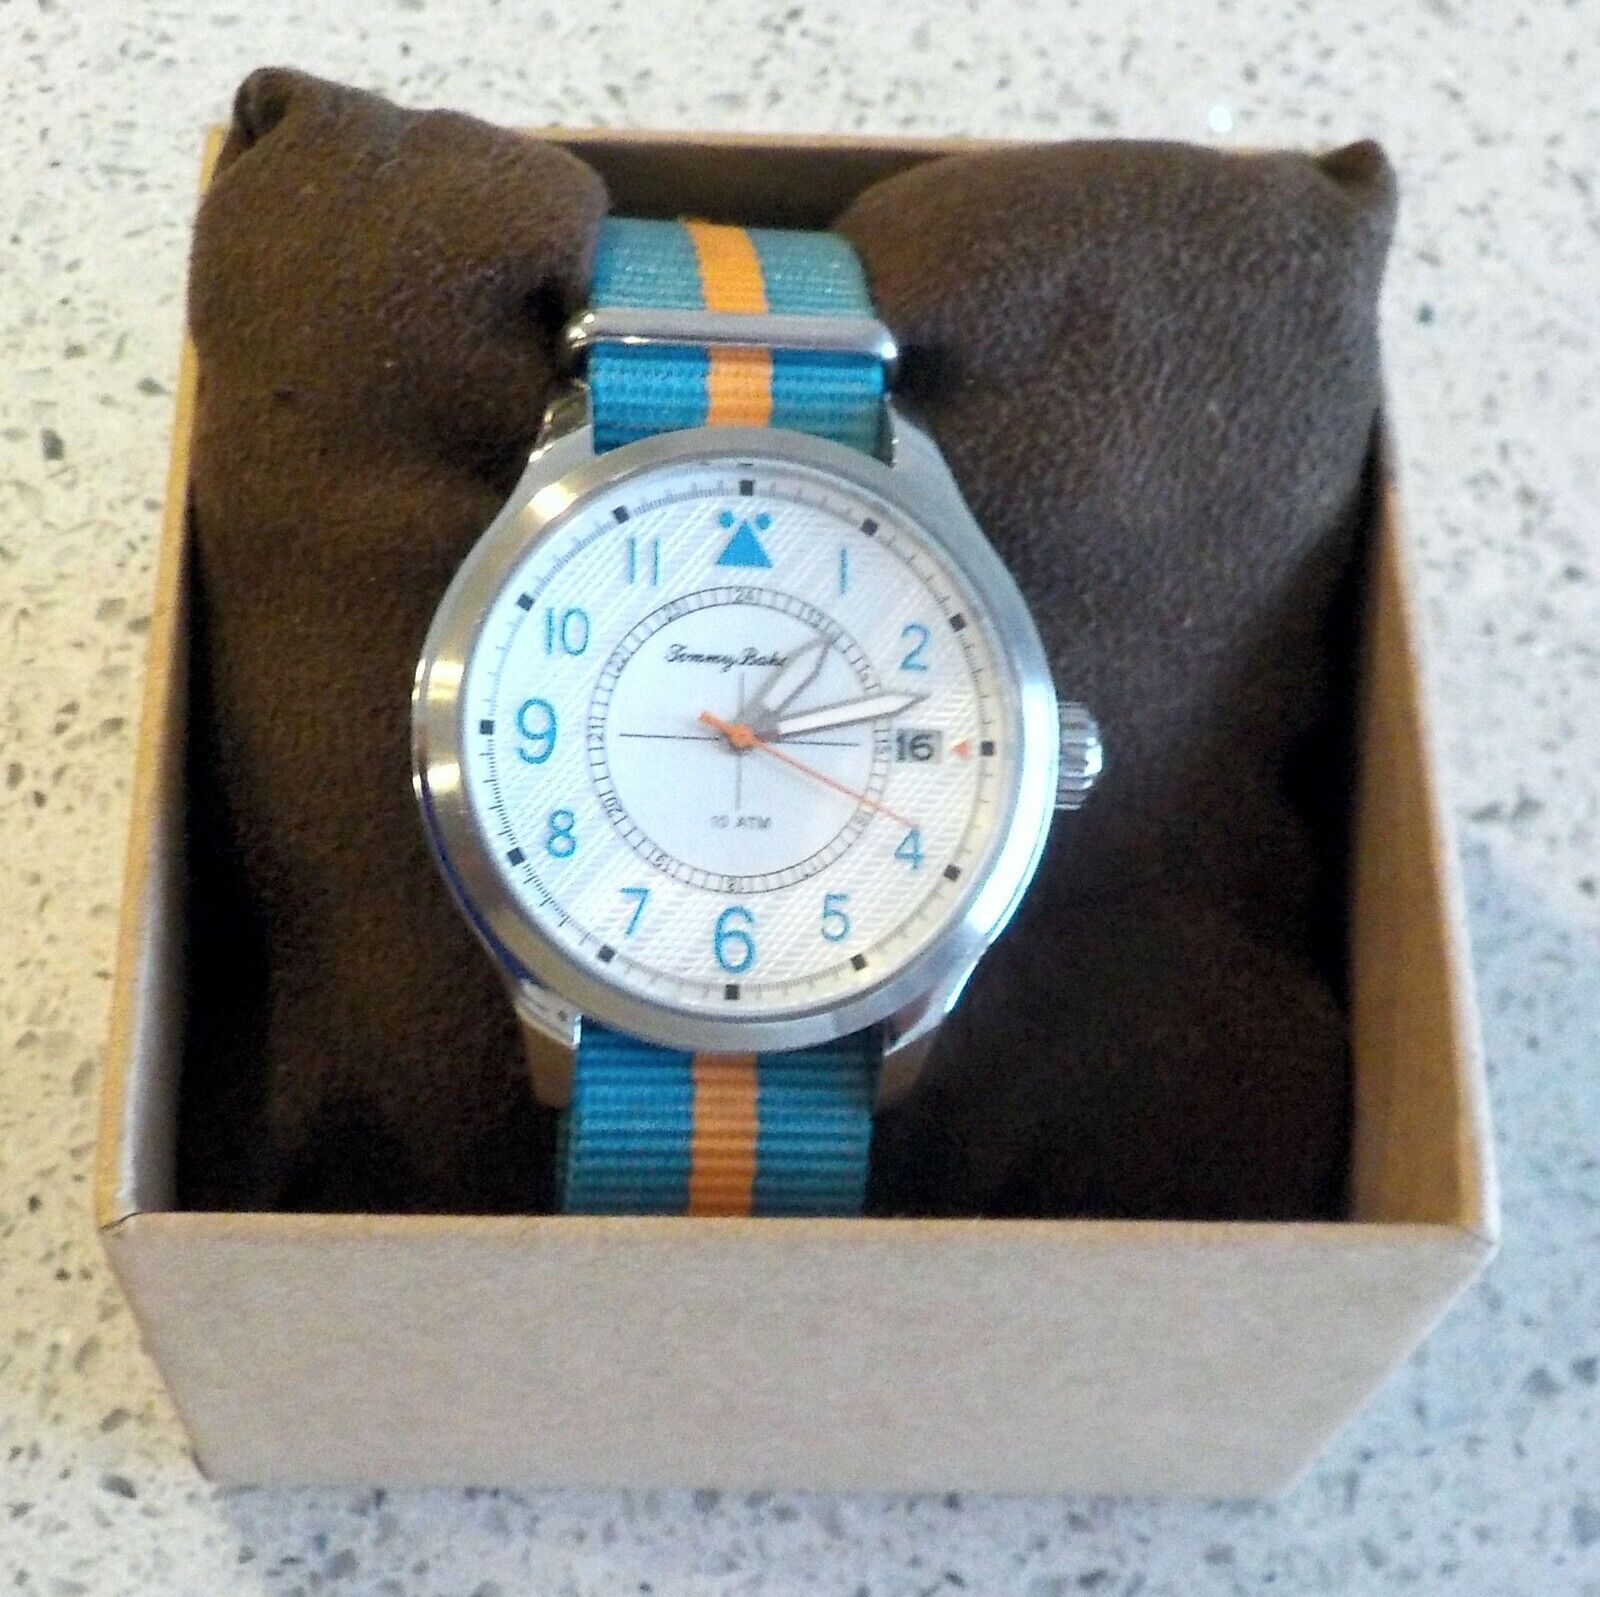  Tommy Bahama  Wristwatch Water Resistant